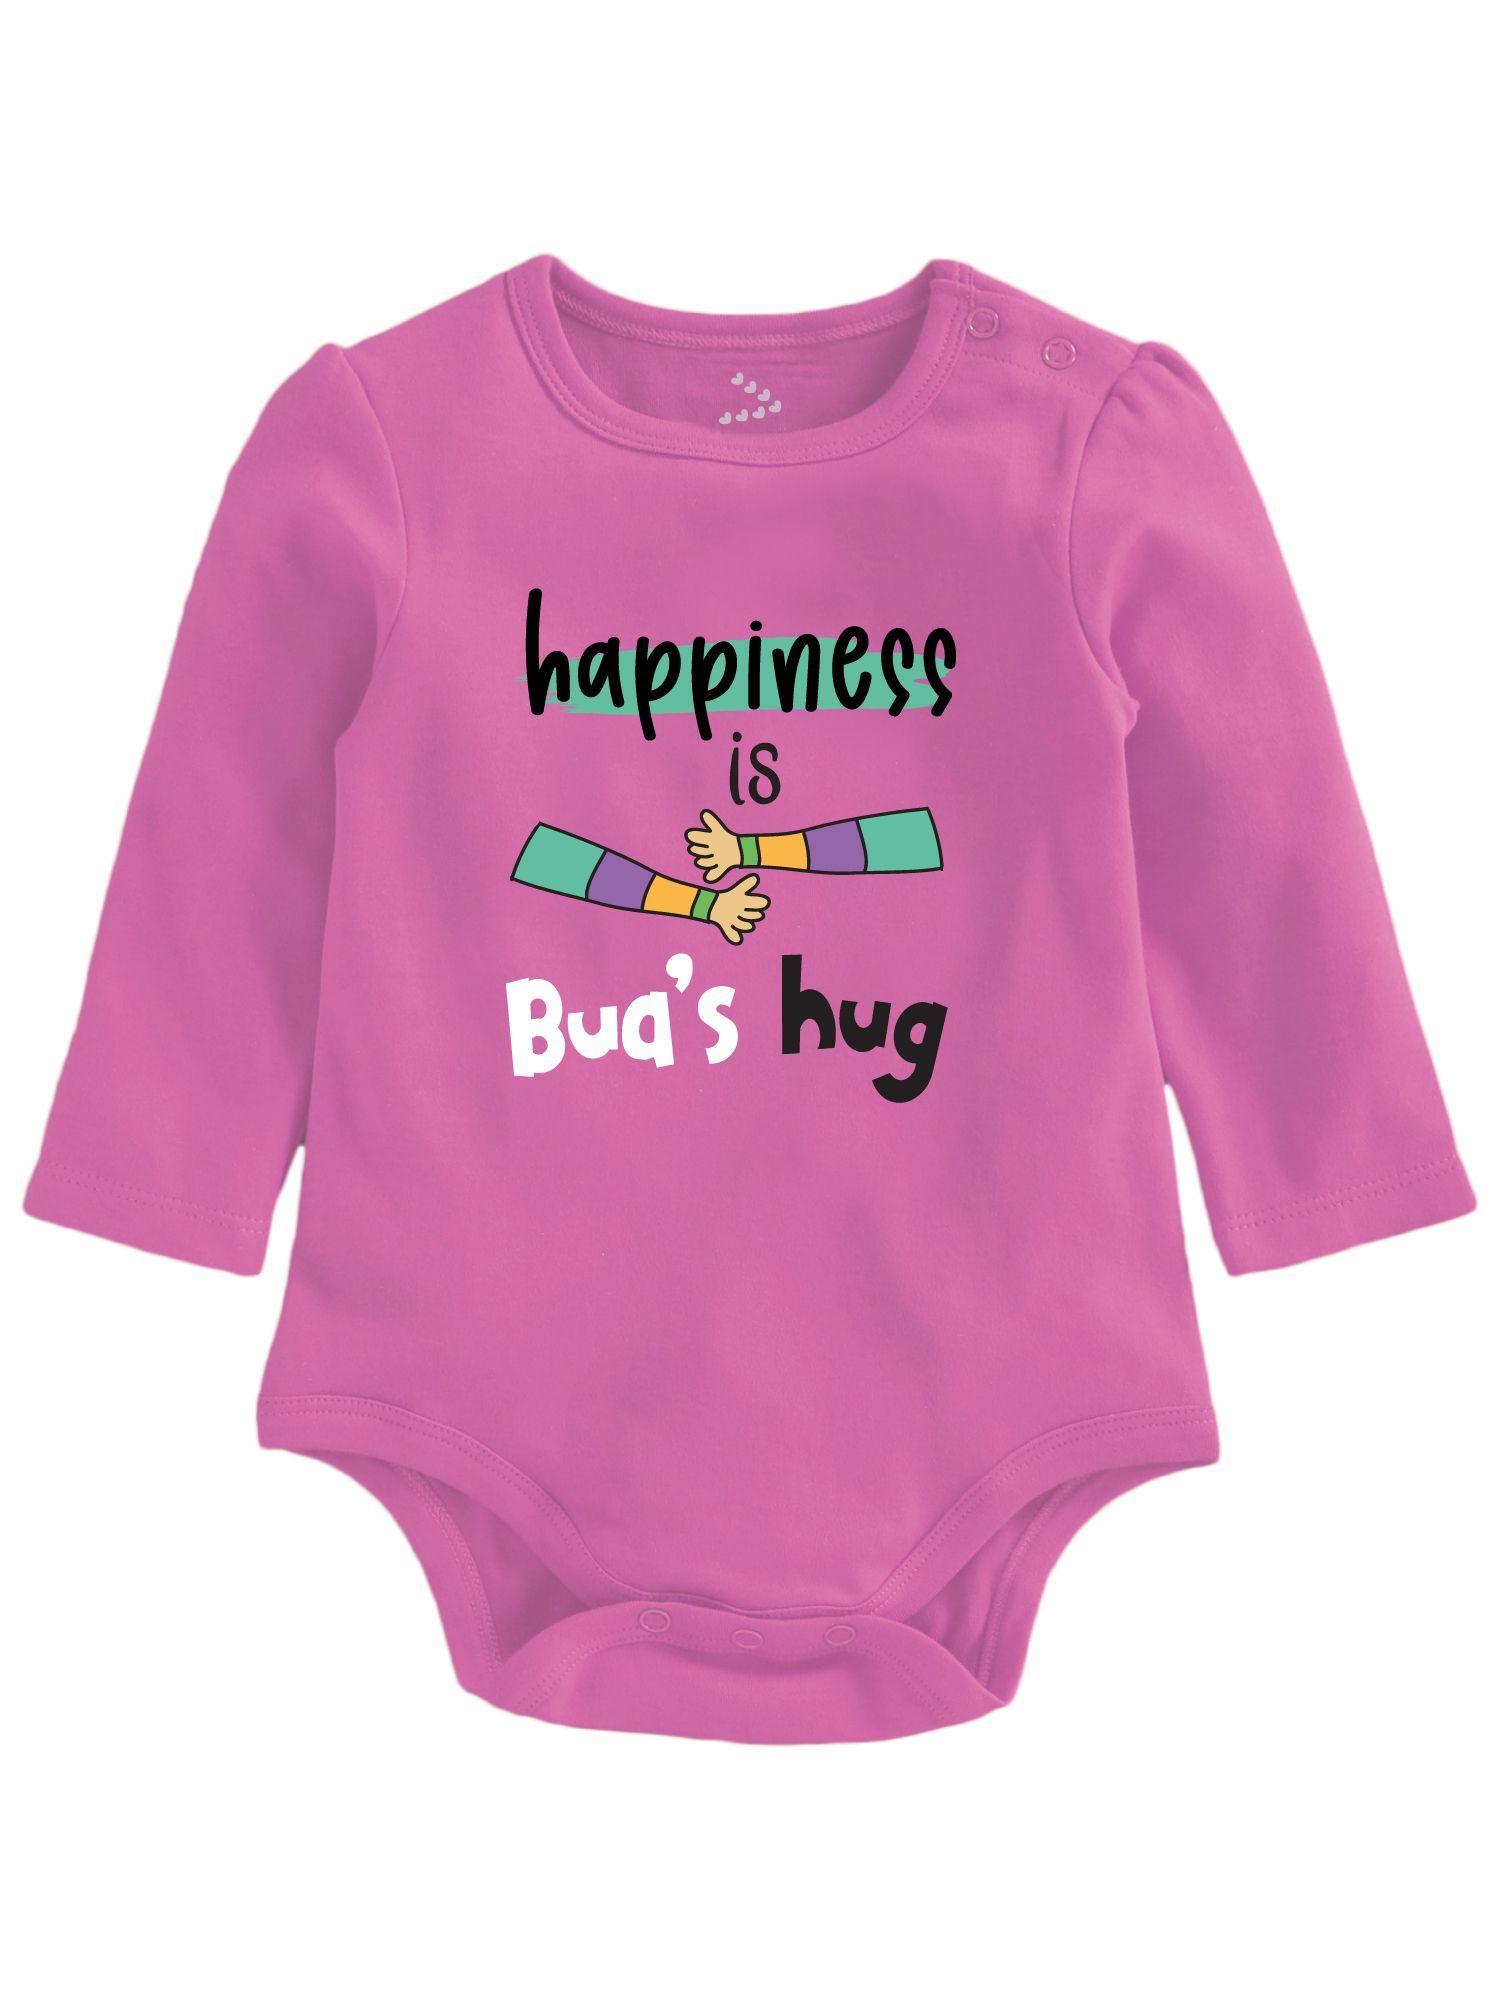 happiness-is-buas-hug-newborn-baby-romper-clothes-bua-&-baby-theme